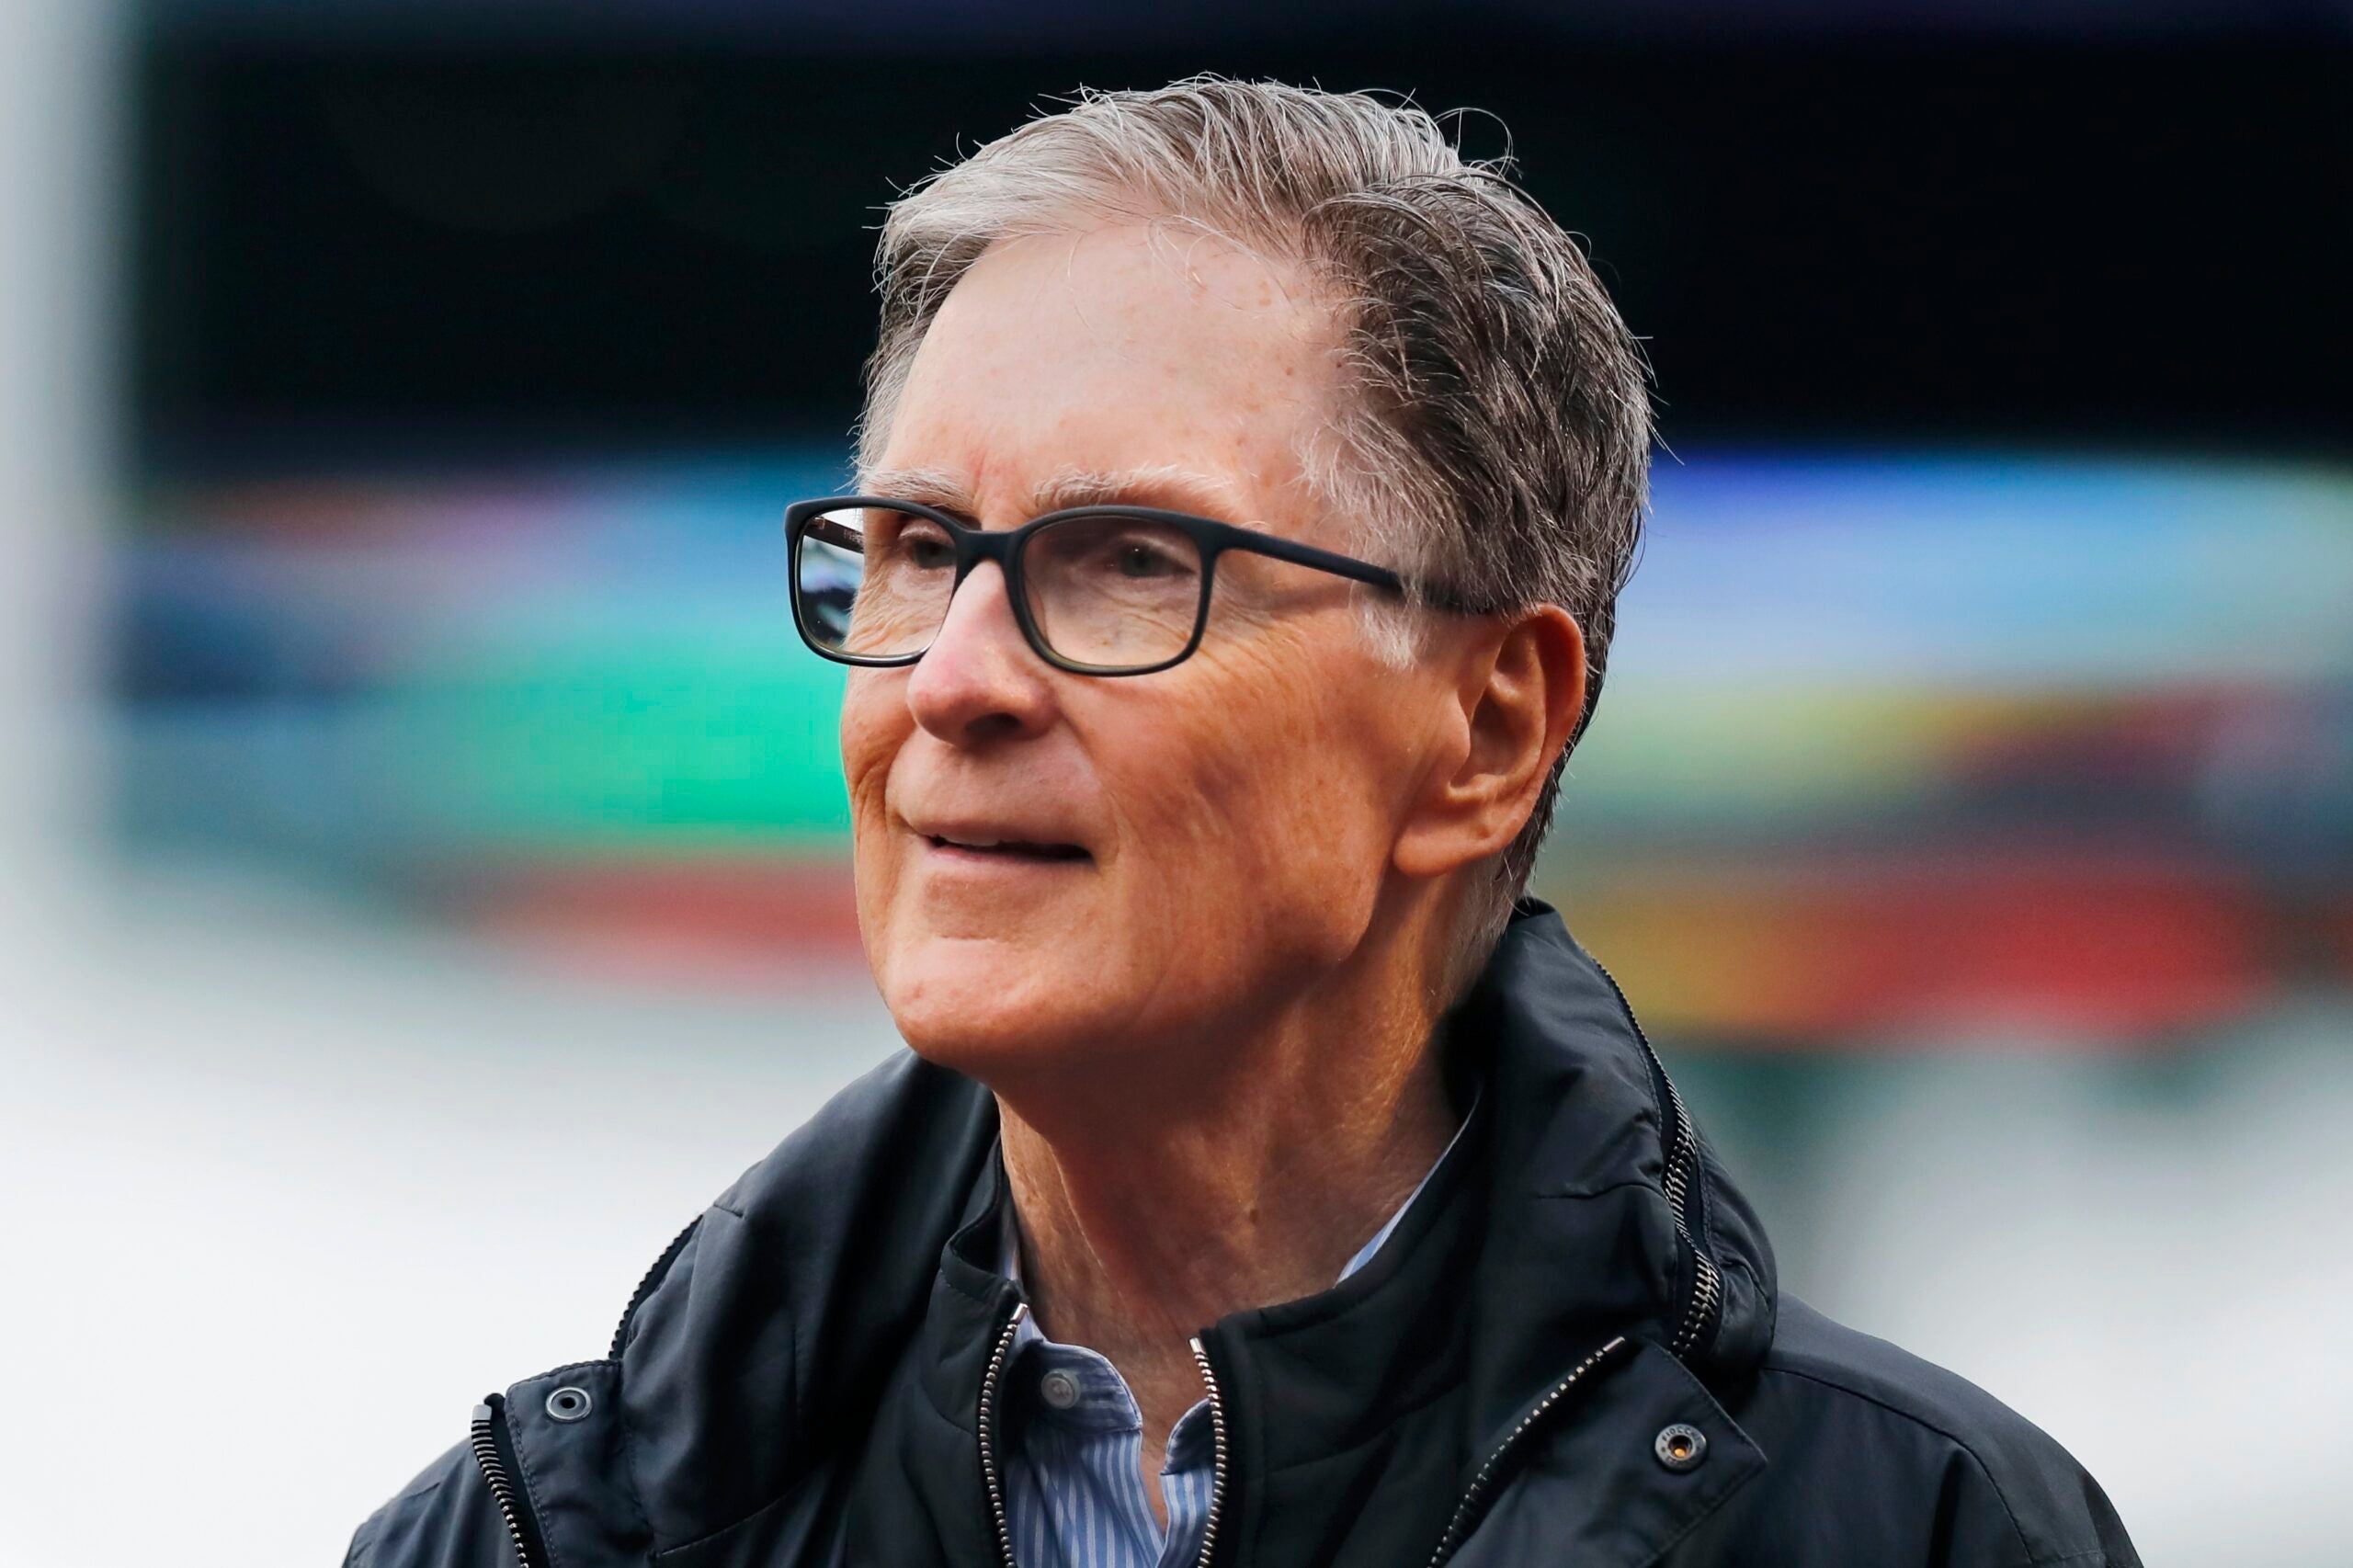 Red Sox owner John Henry says he has no plans to sell club